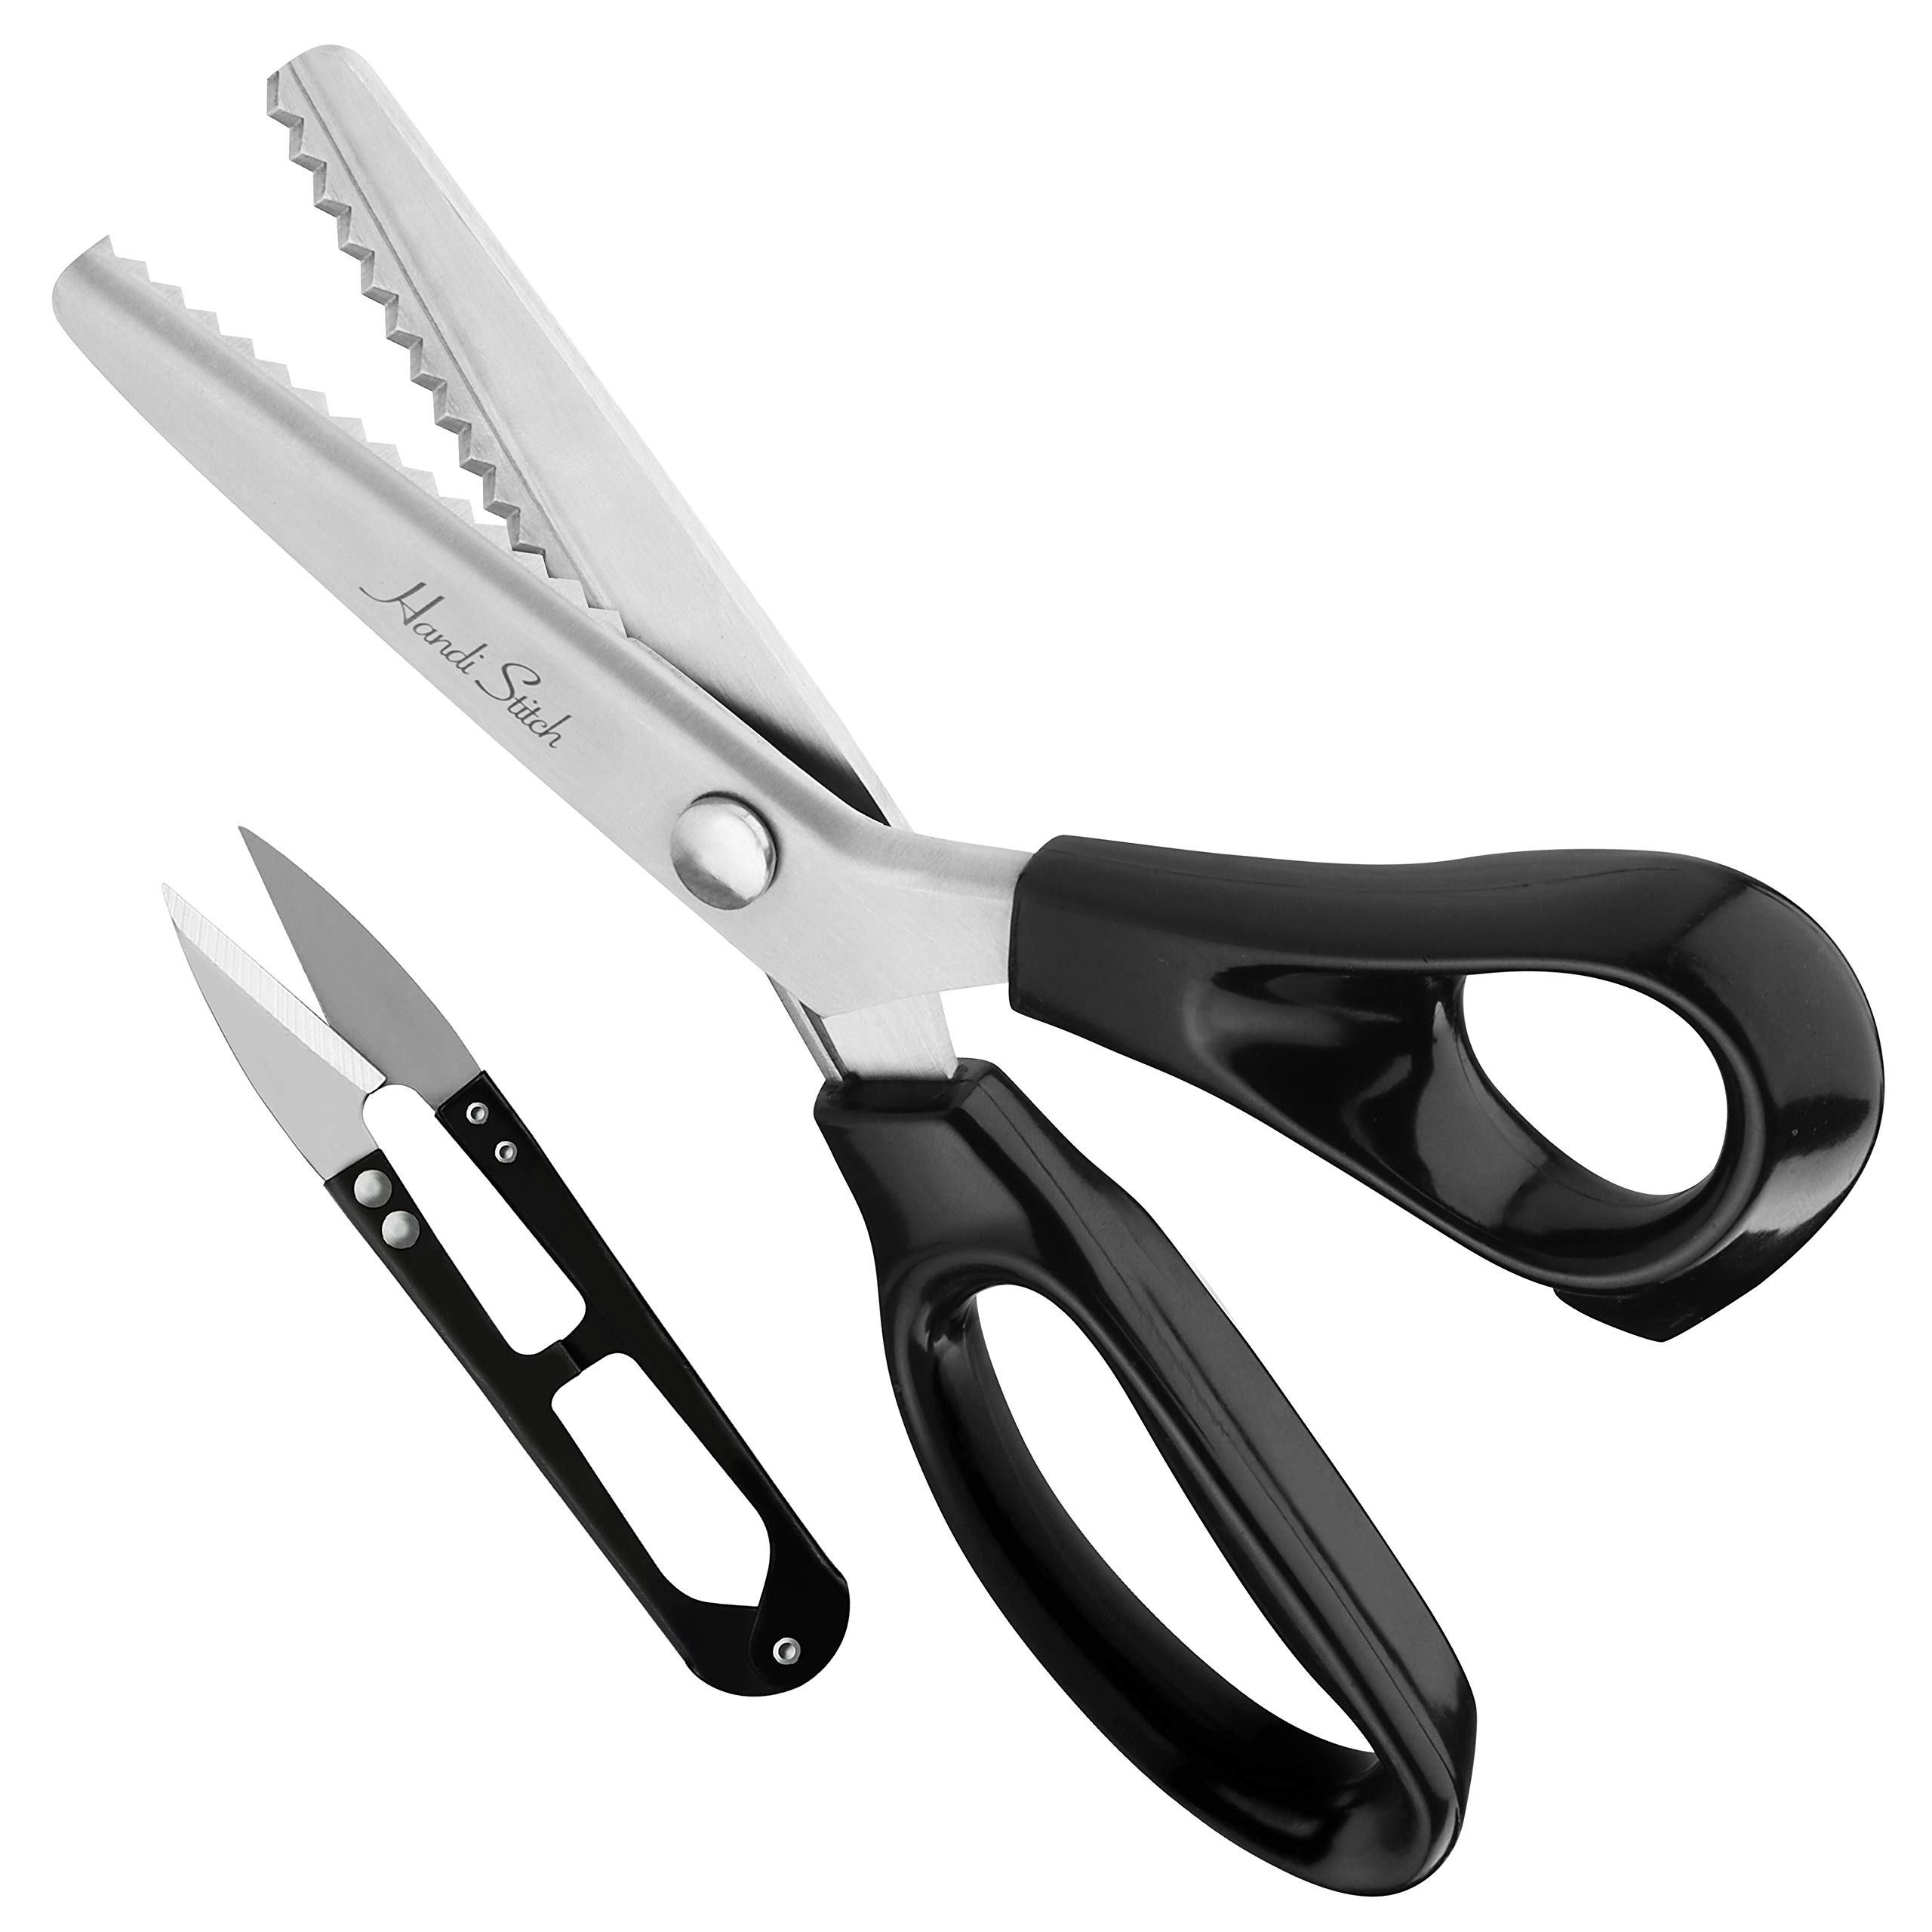 5 Star Stainless Steel Scissors Craft Paper Sharp Small Tailoring